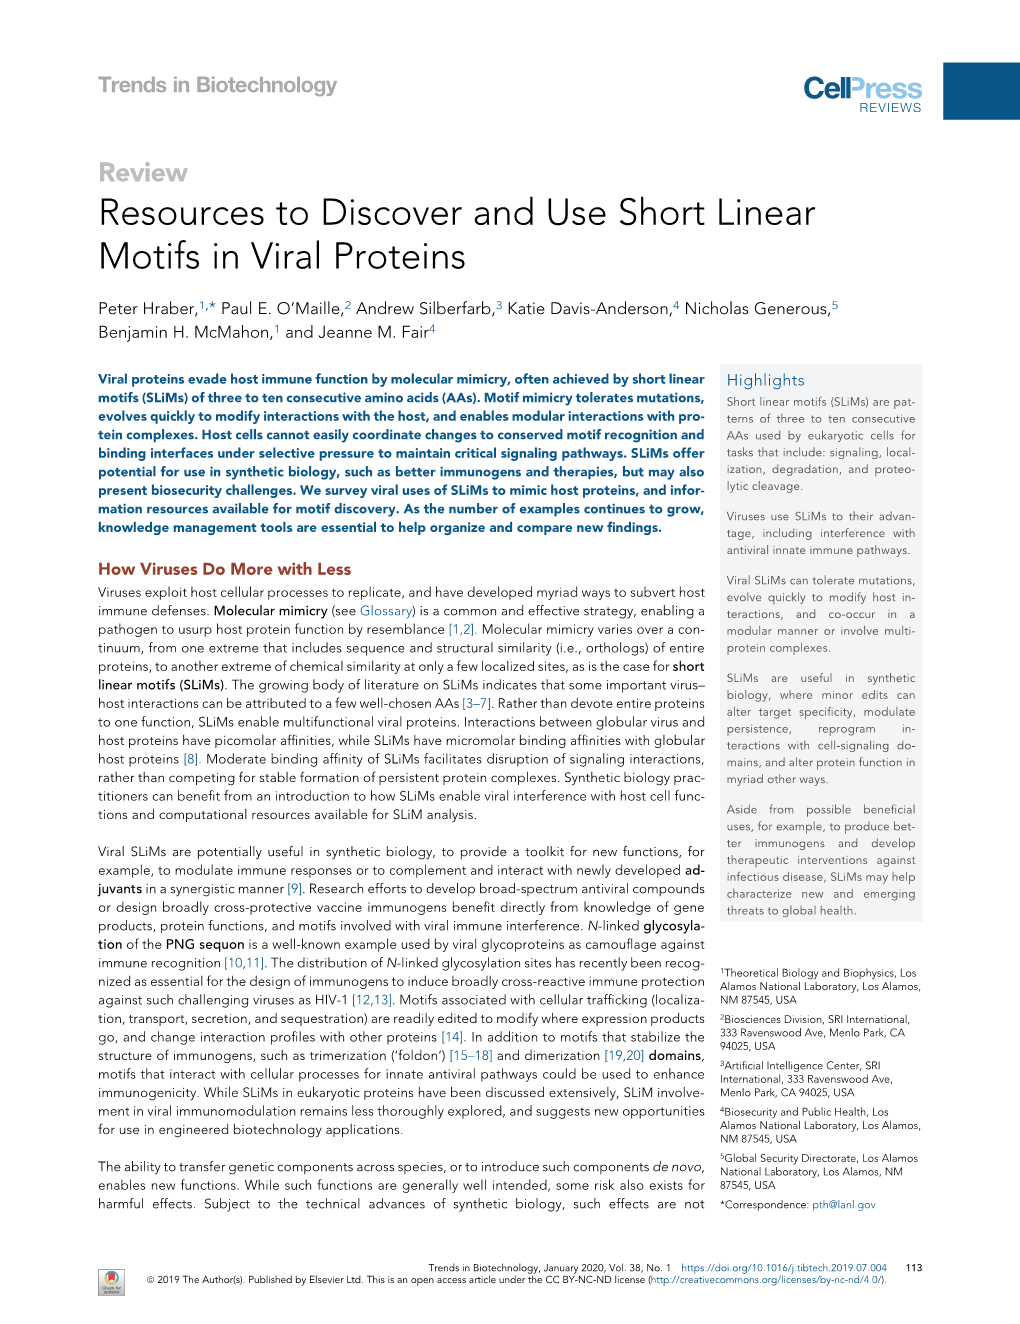 Resources to Discover and Use Short Linear Motifs in Viral Proteins